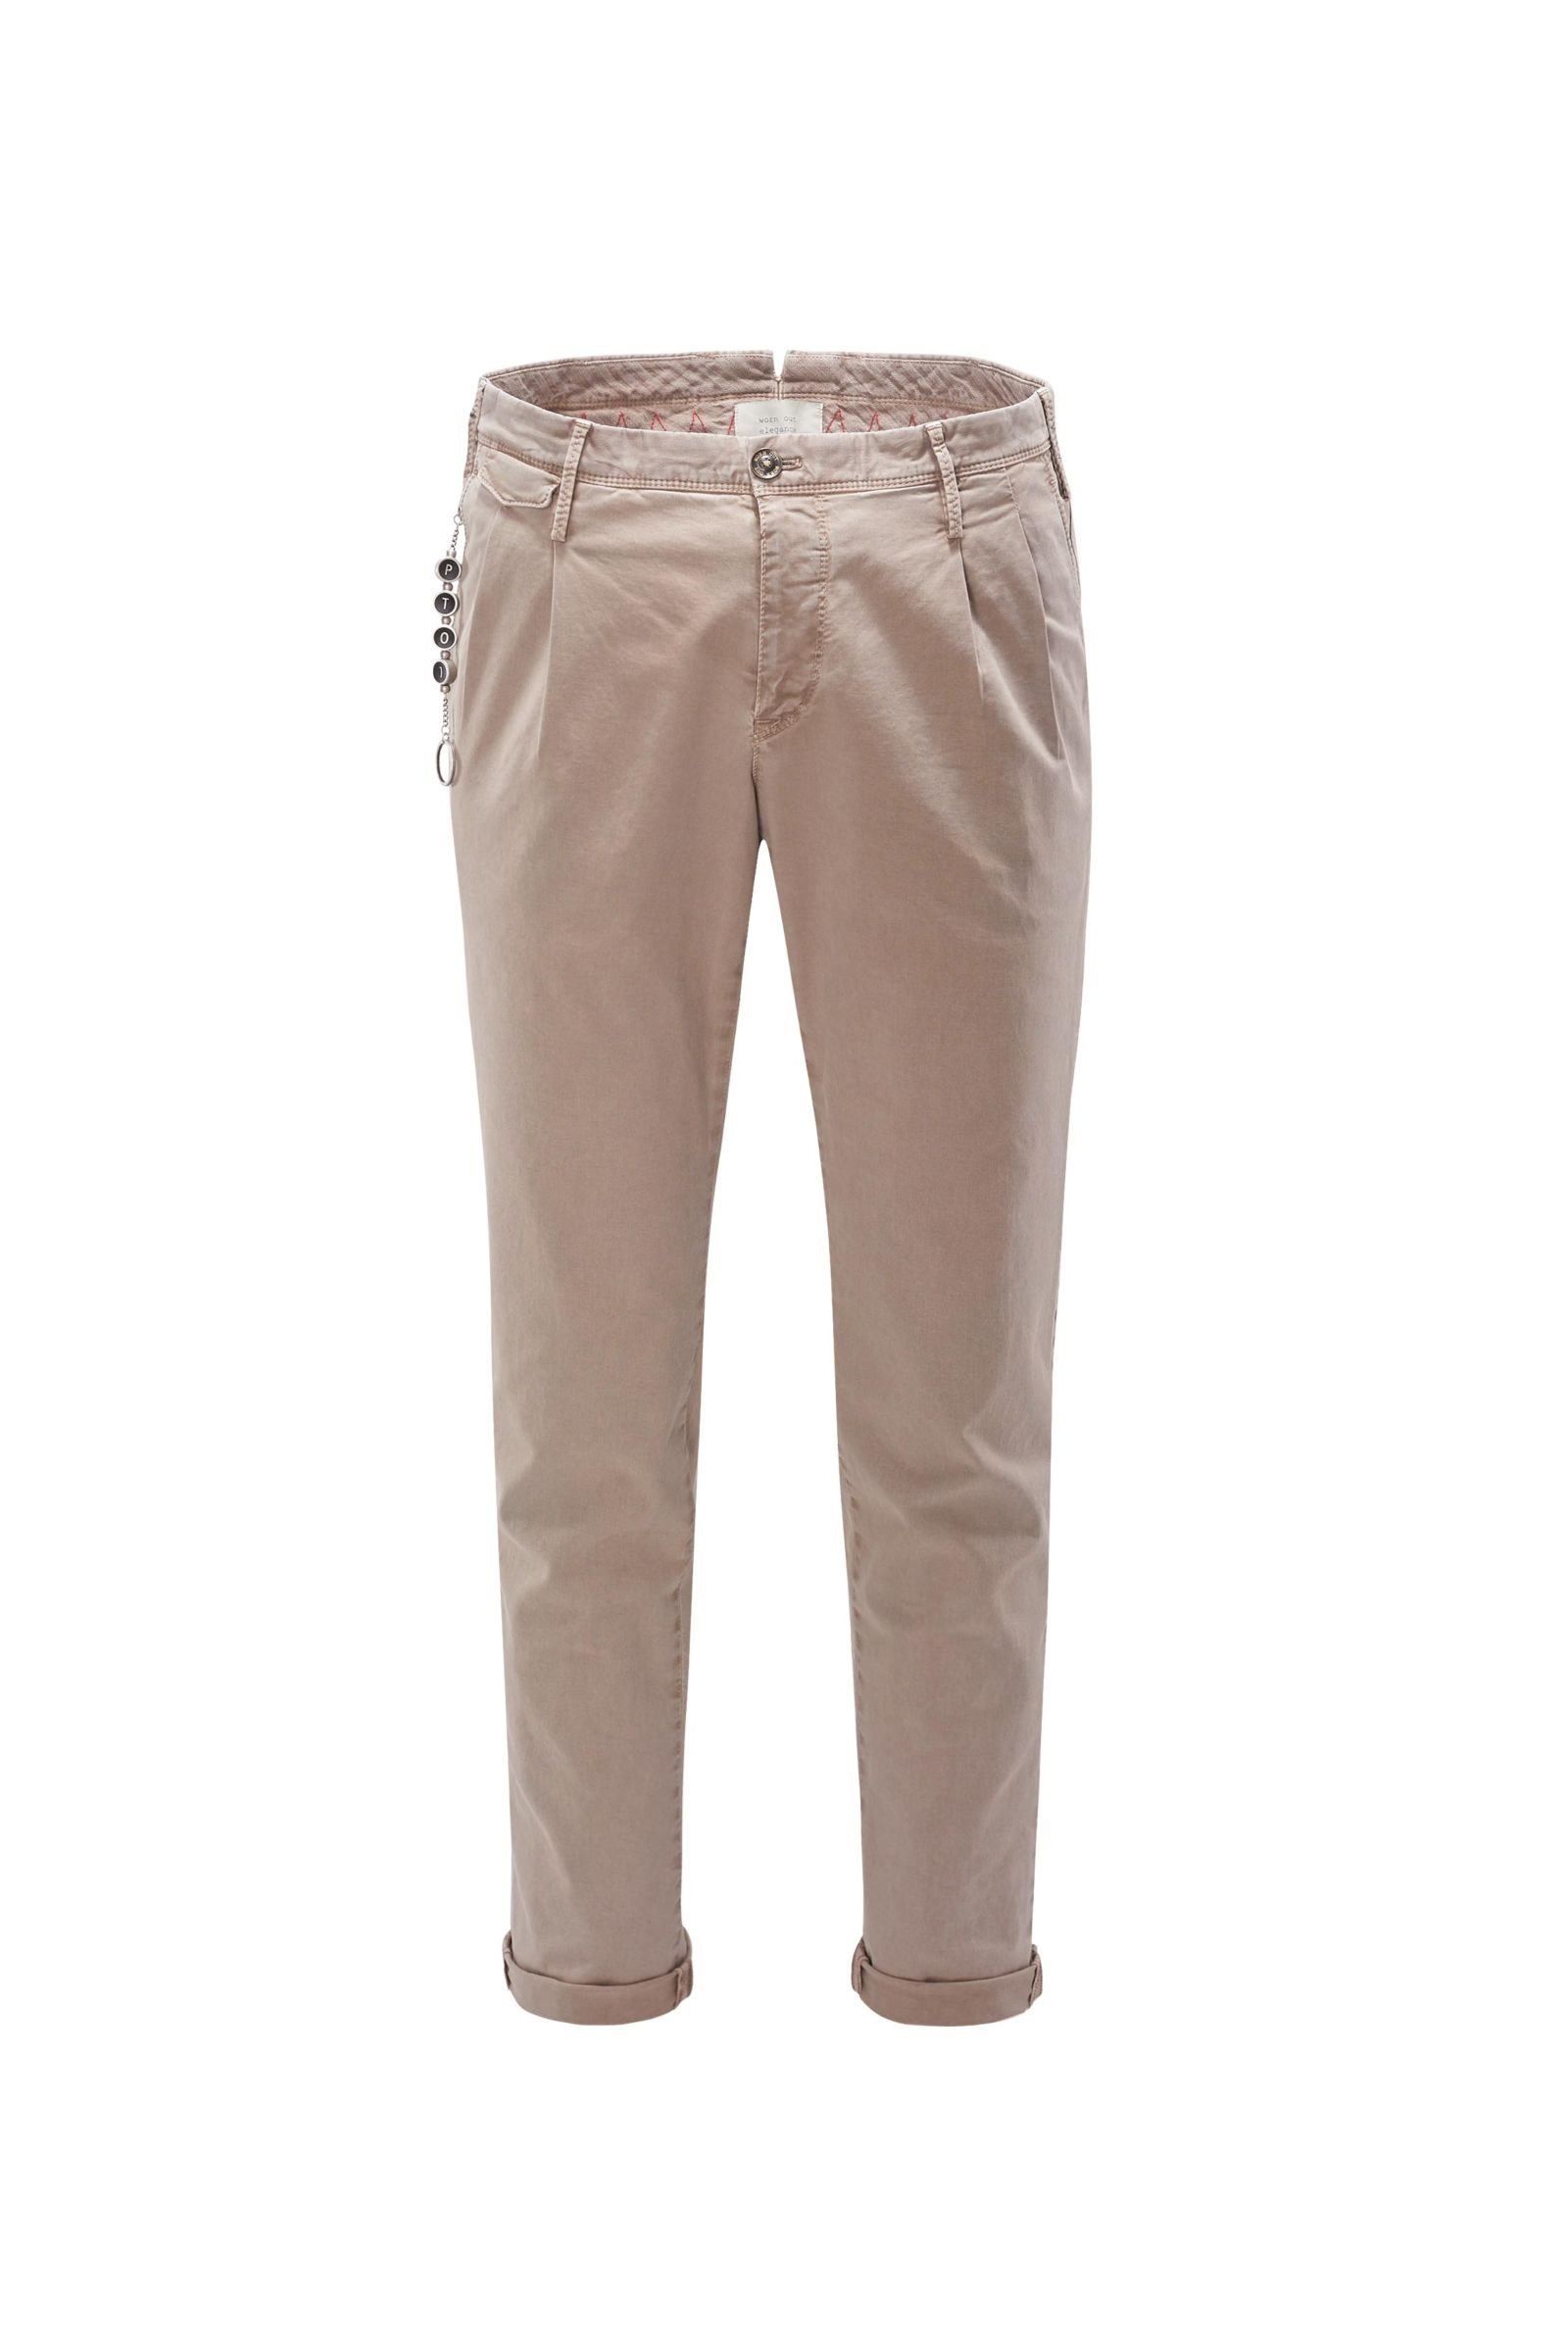 Cotton trousers 'Arial Worn out Elegance' khaki